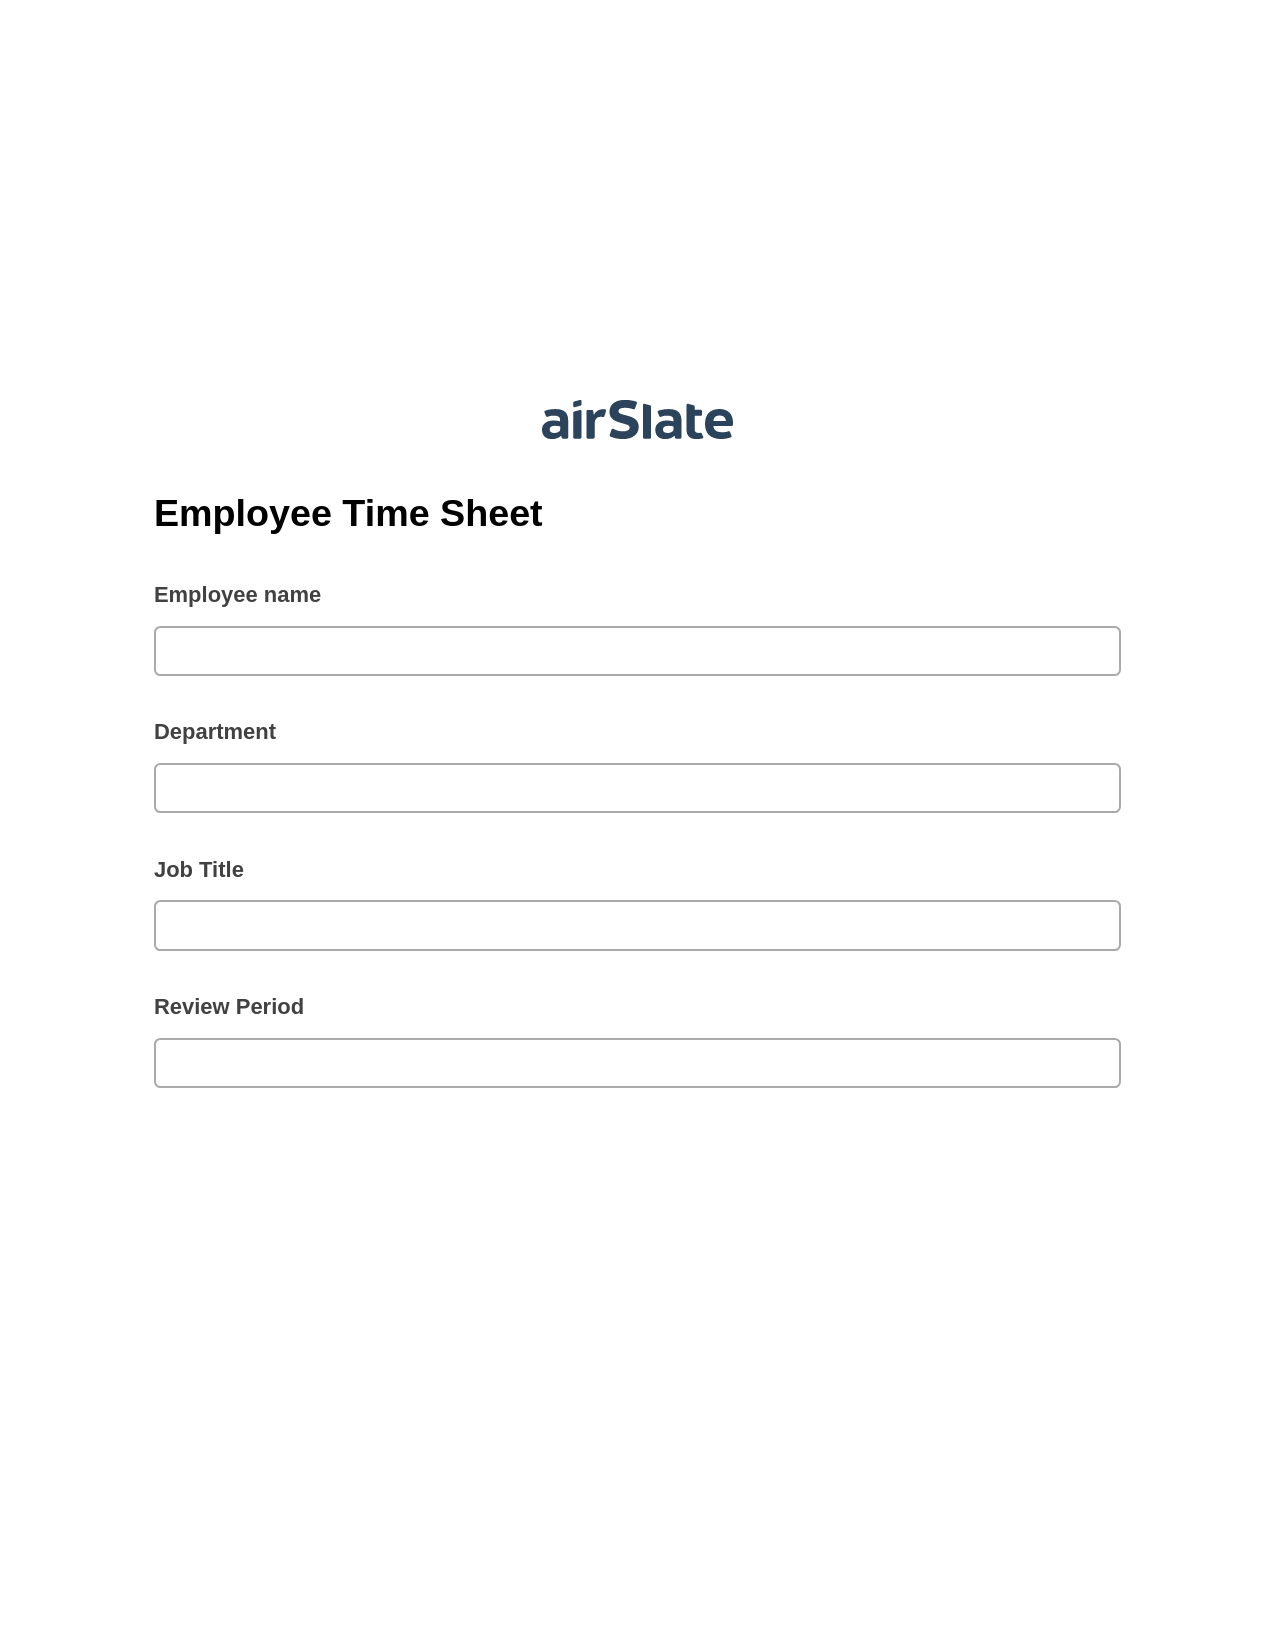 Employee Time Sheet Pre-fill from another Slate Bot, Create Salesforce Records Bot, Archive to SharePoint Folder Bot